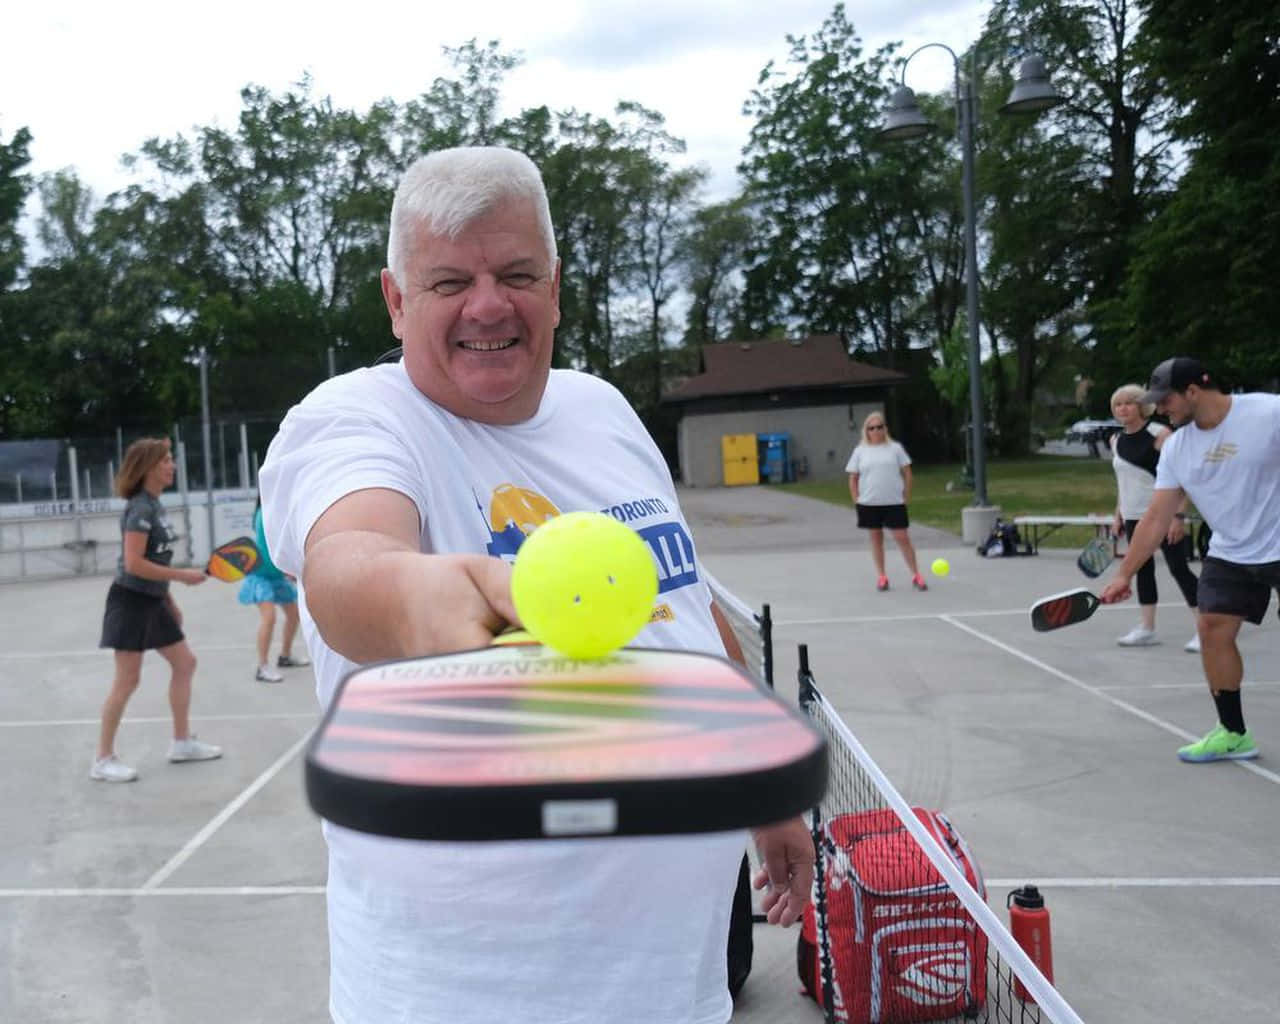 Maximizing Pickleball: Group Lessons for Beginners